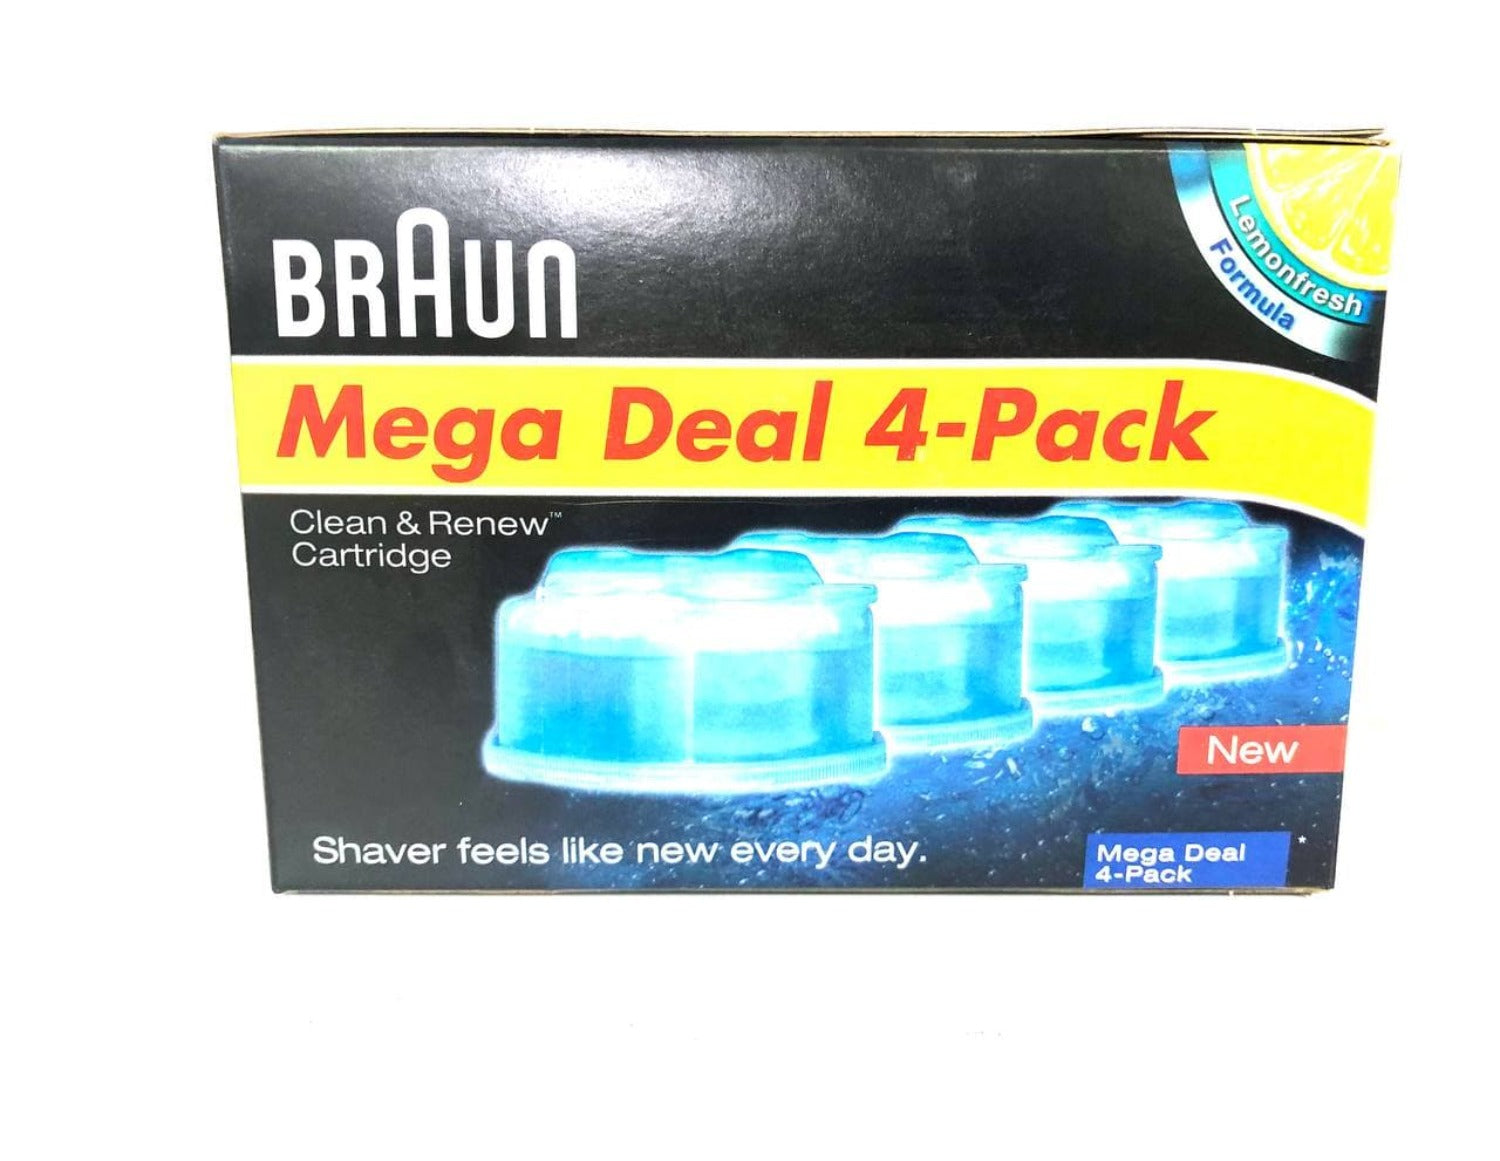 Braun CCR4 Cleaning Cartridges - 4 Pack Clean & Renew Refill Cartridges